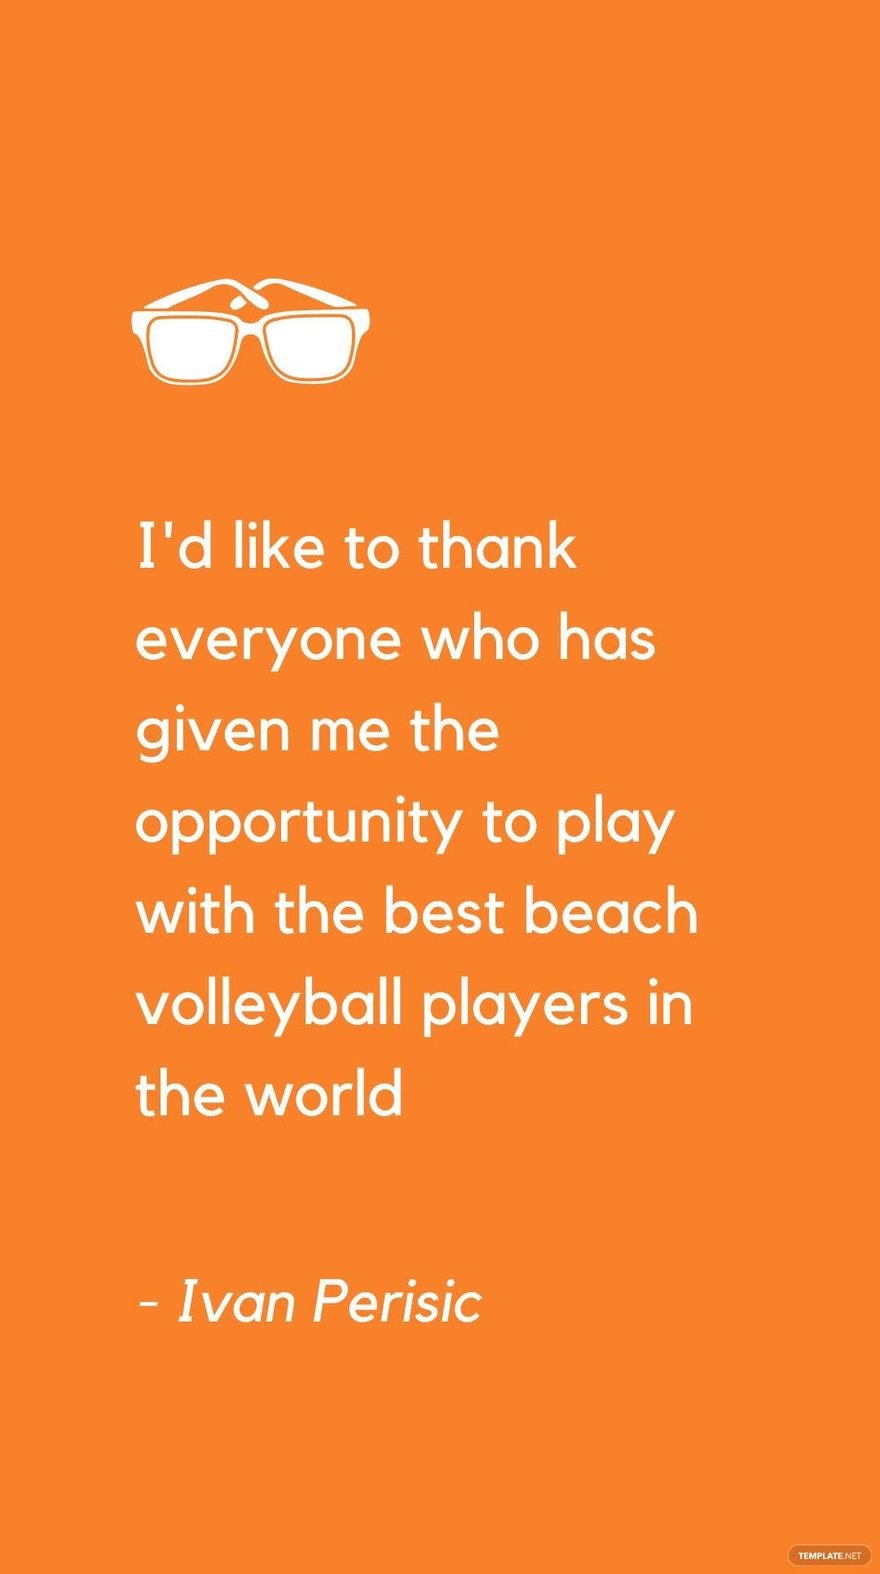 Free Ivan Perisic - I'd like to thank everyone who has given me the opportunity to play with the best beach volleyball players in the world in JPG